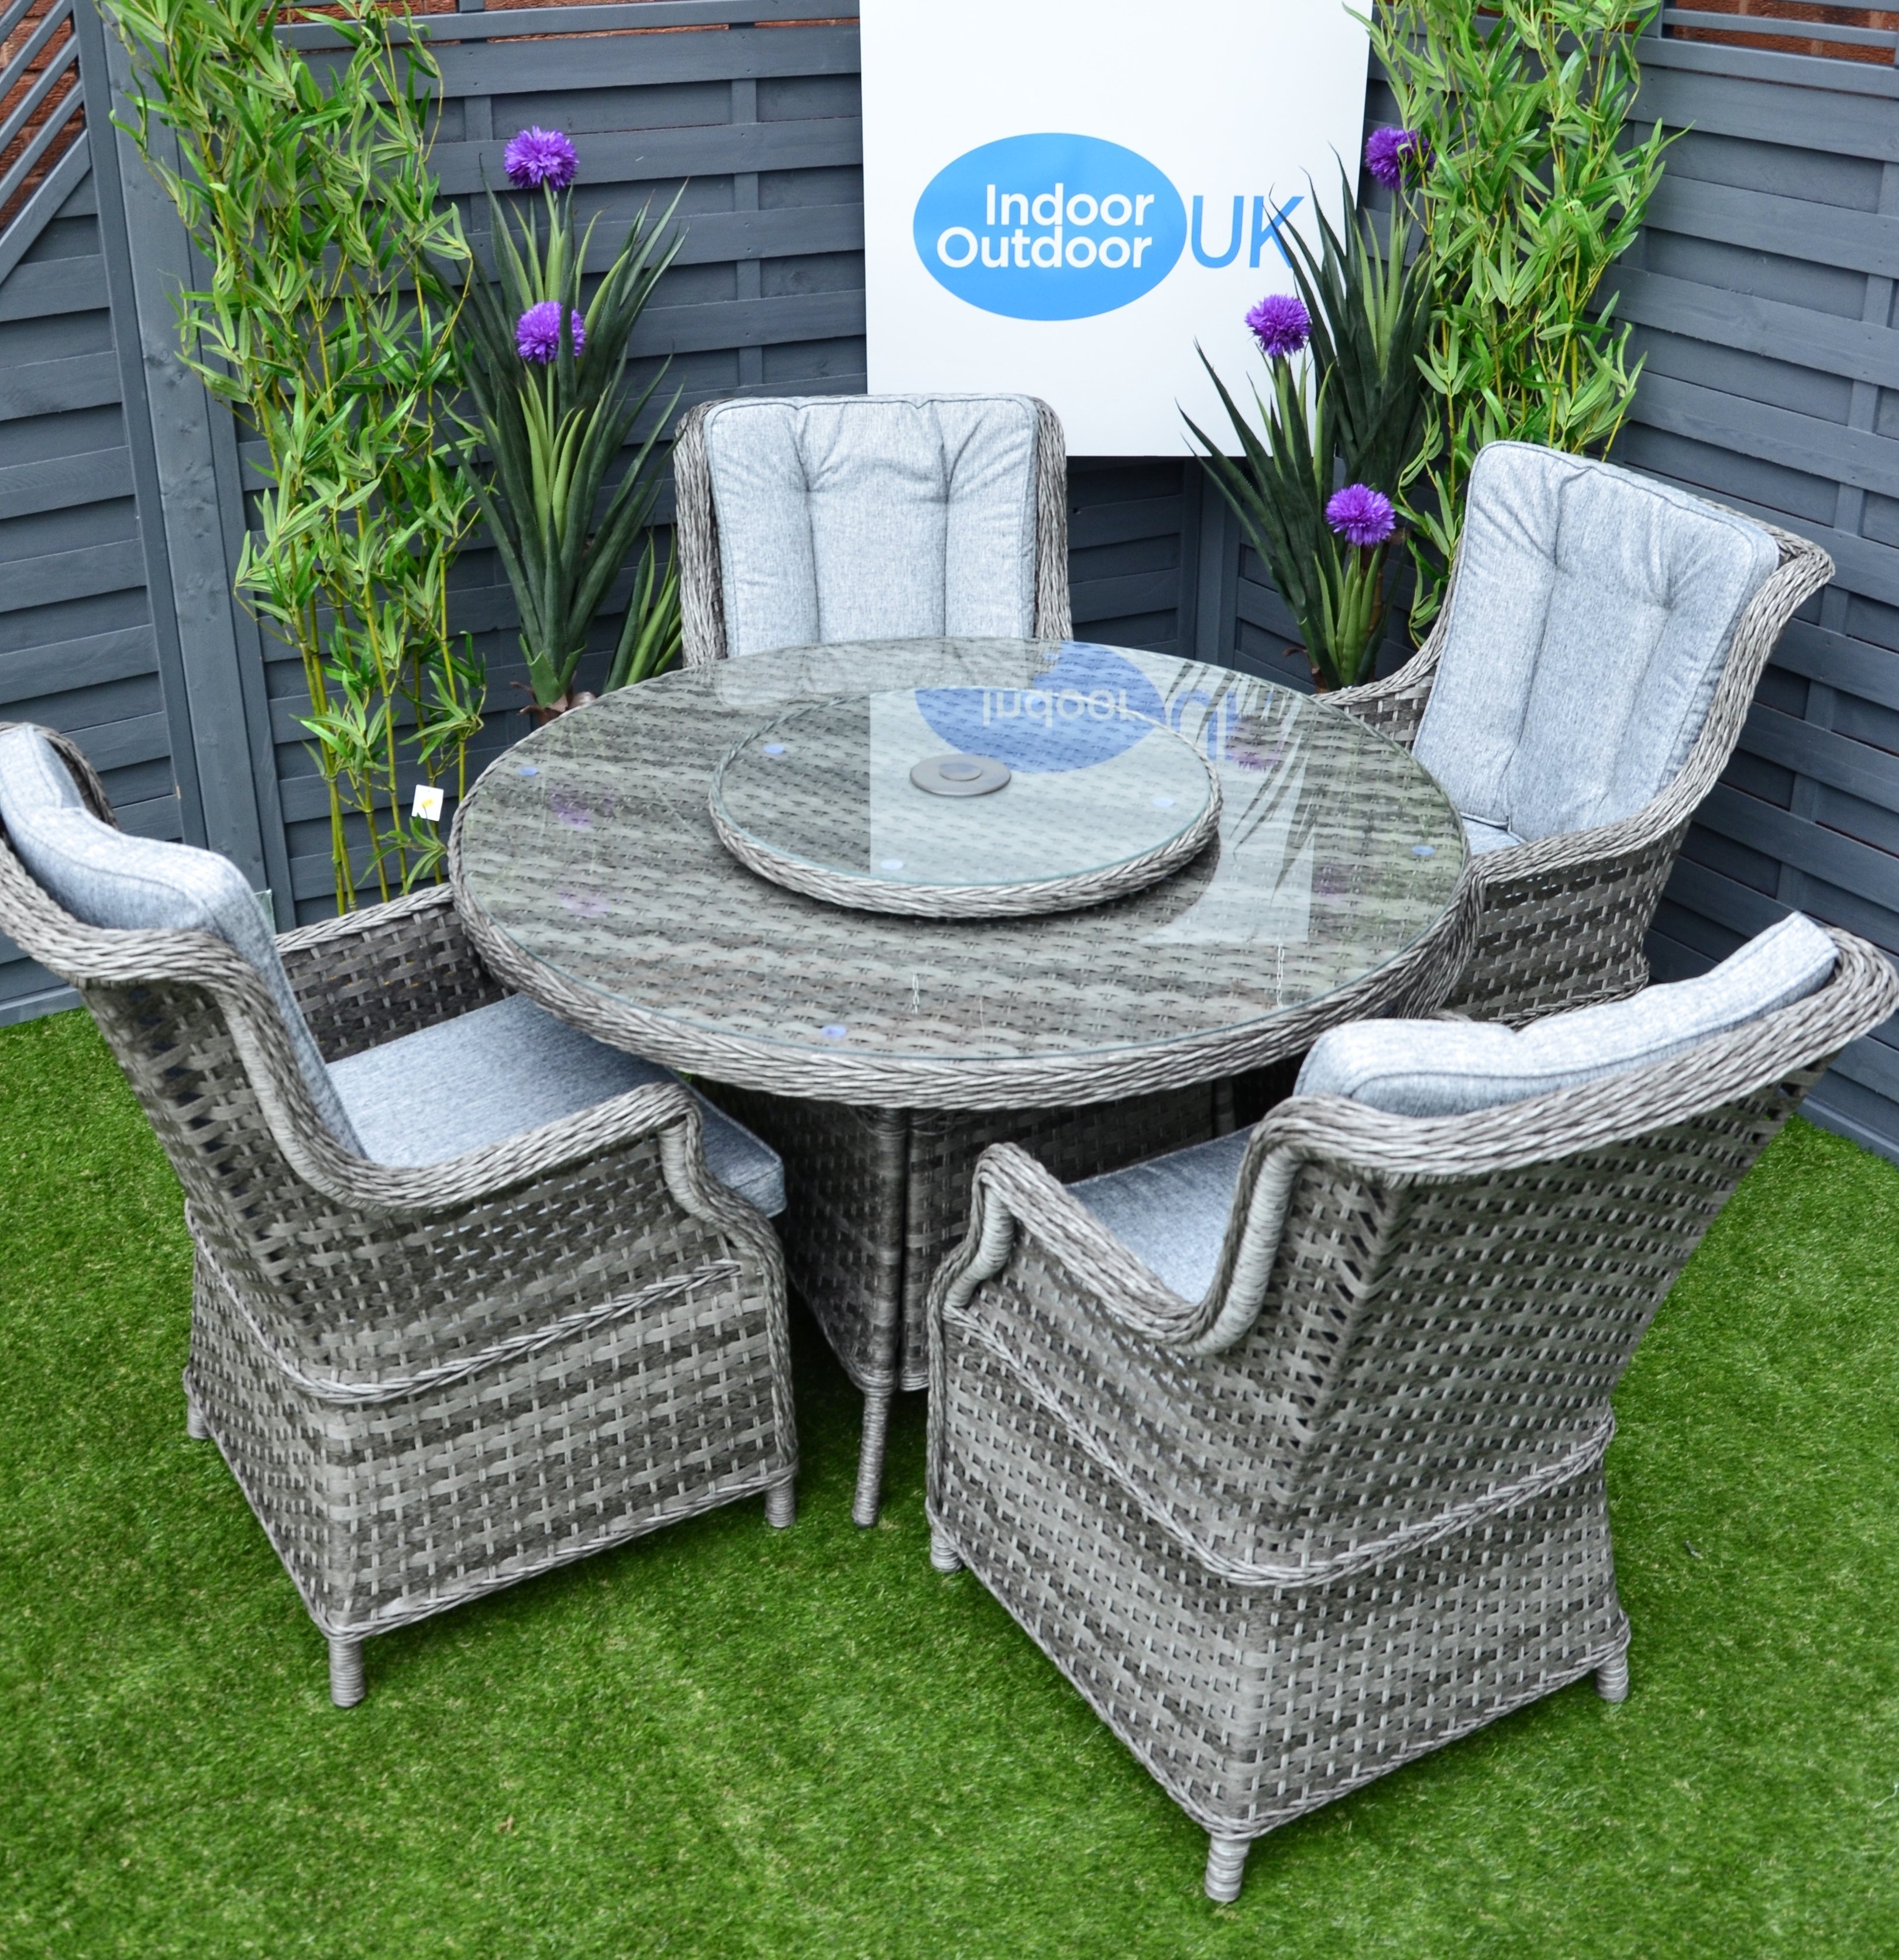 Hatherton Round Glass Top Rattan Dining Set 4 or 6 Seater- In Grey or Natural AVAILABITY 15th JULY – 4 seater dining set grey colour JULY AVAILABILITY